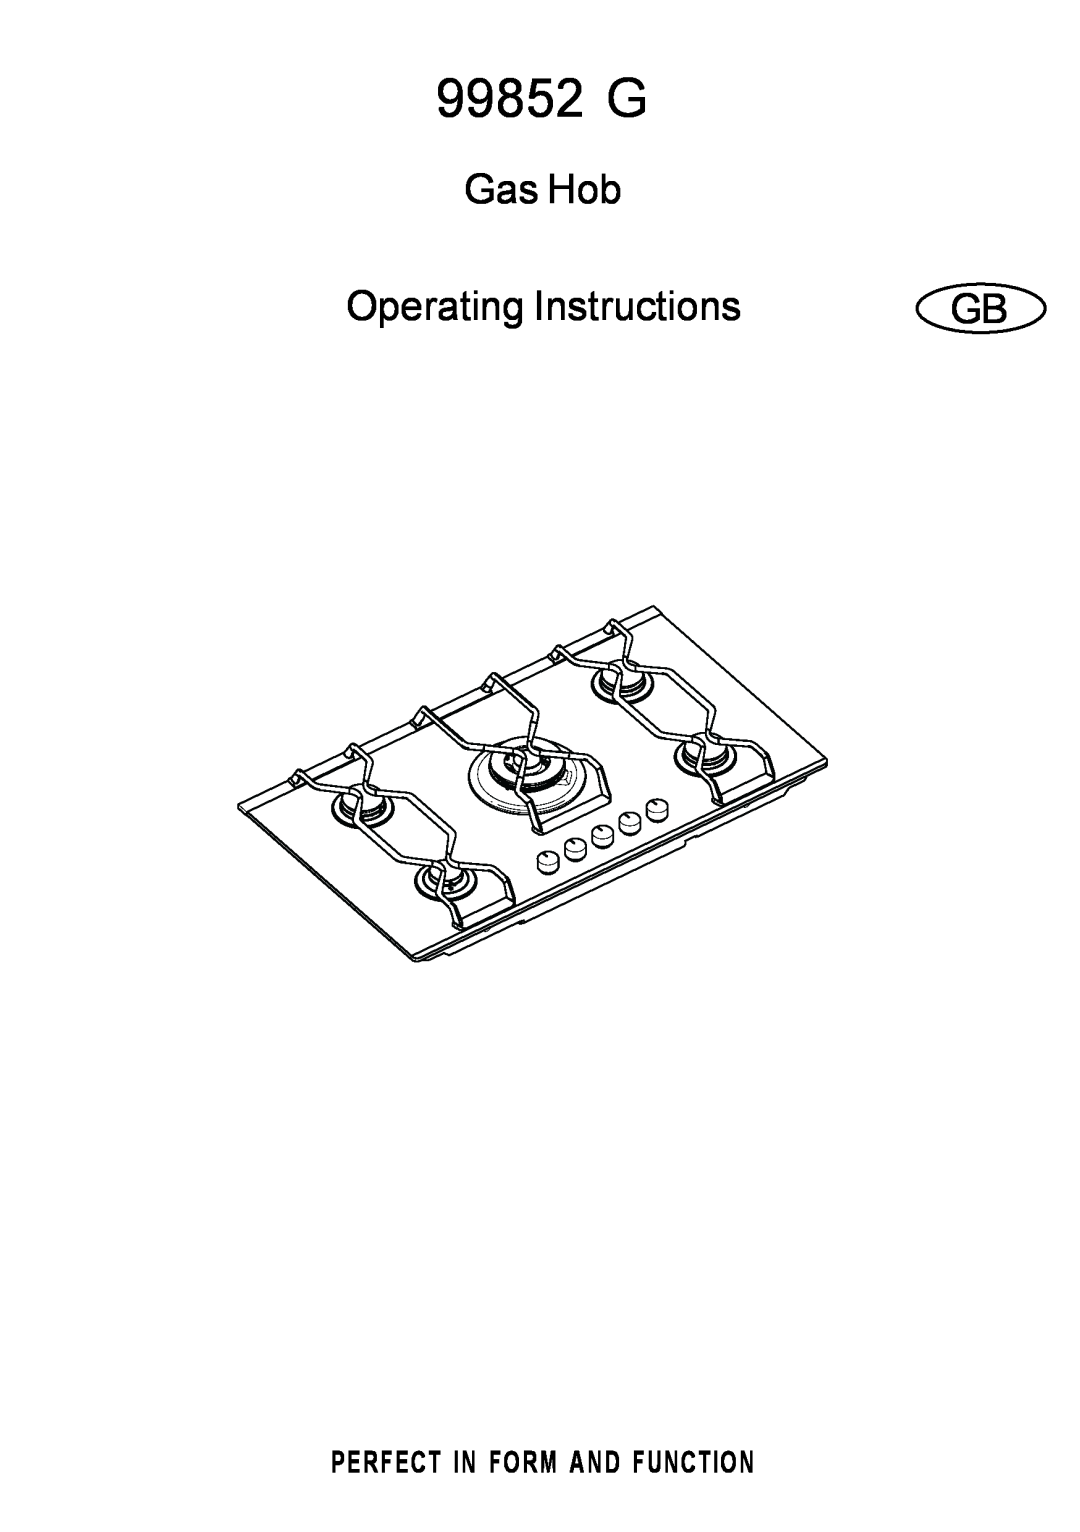 Electrolux 99852 G manual Perfect In Form And Function, Gas Hob, Operating Instructions 